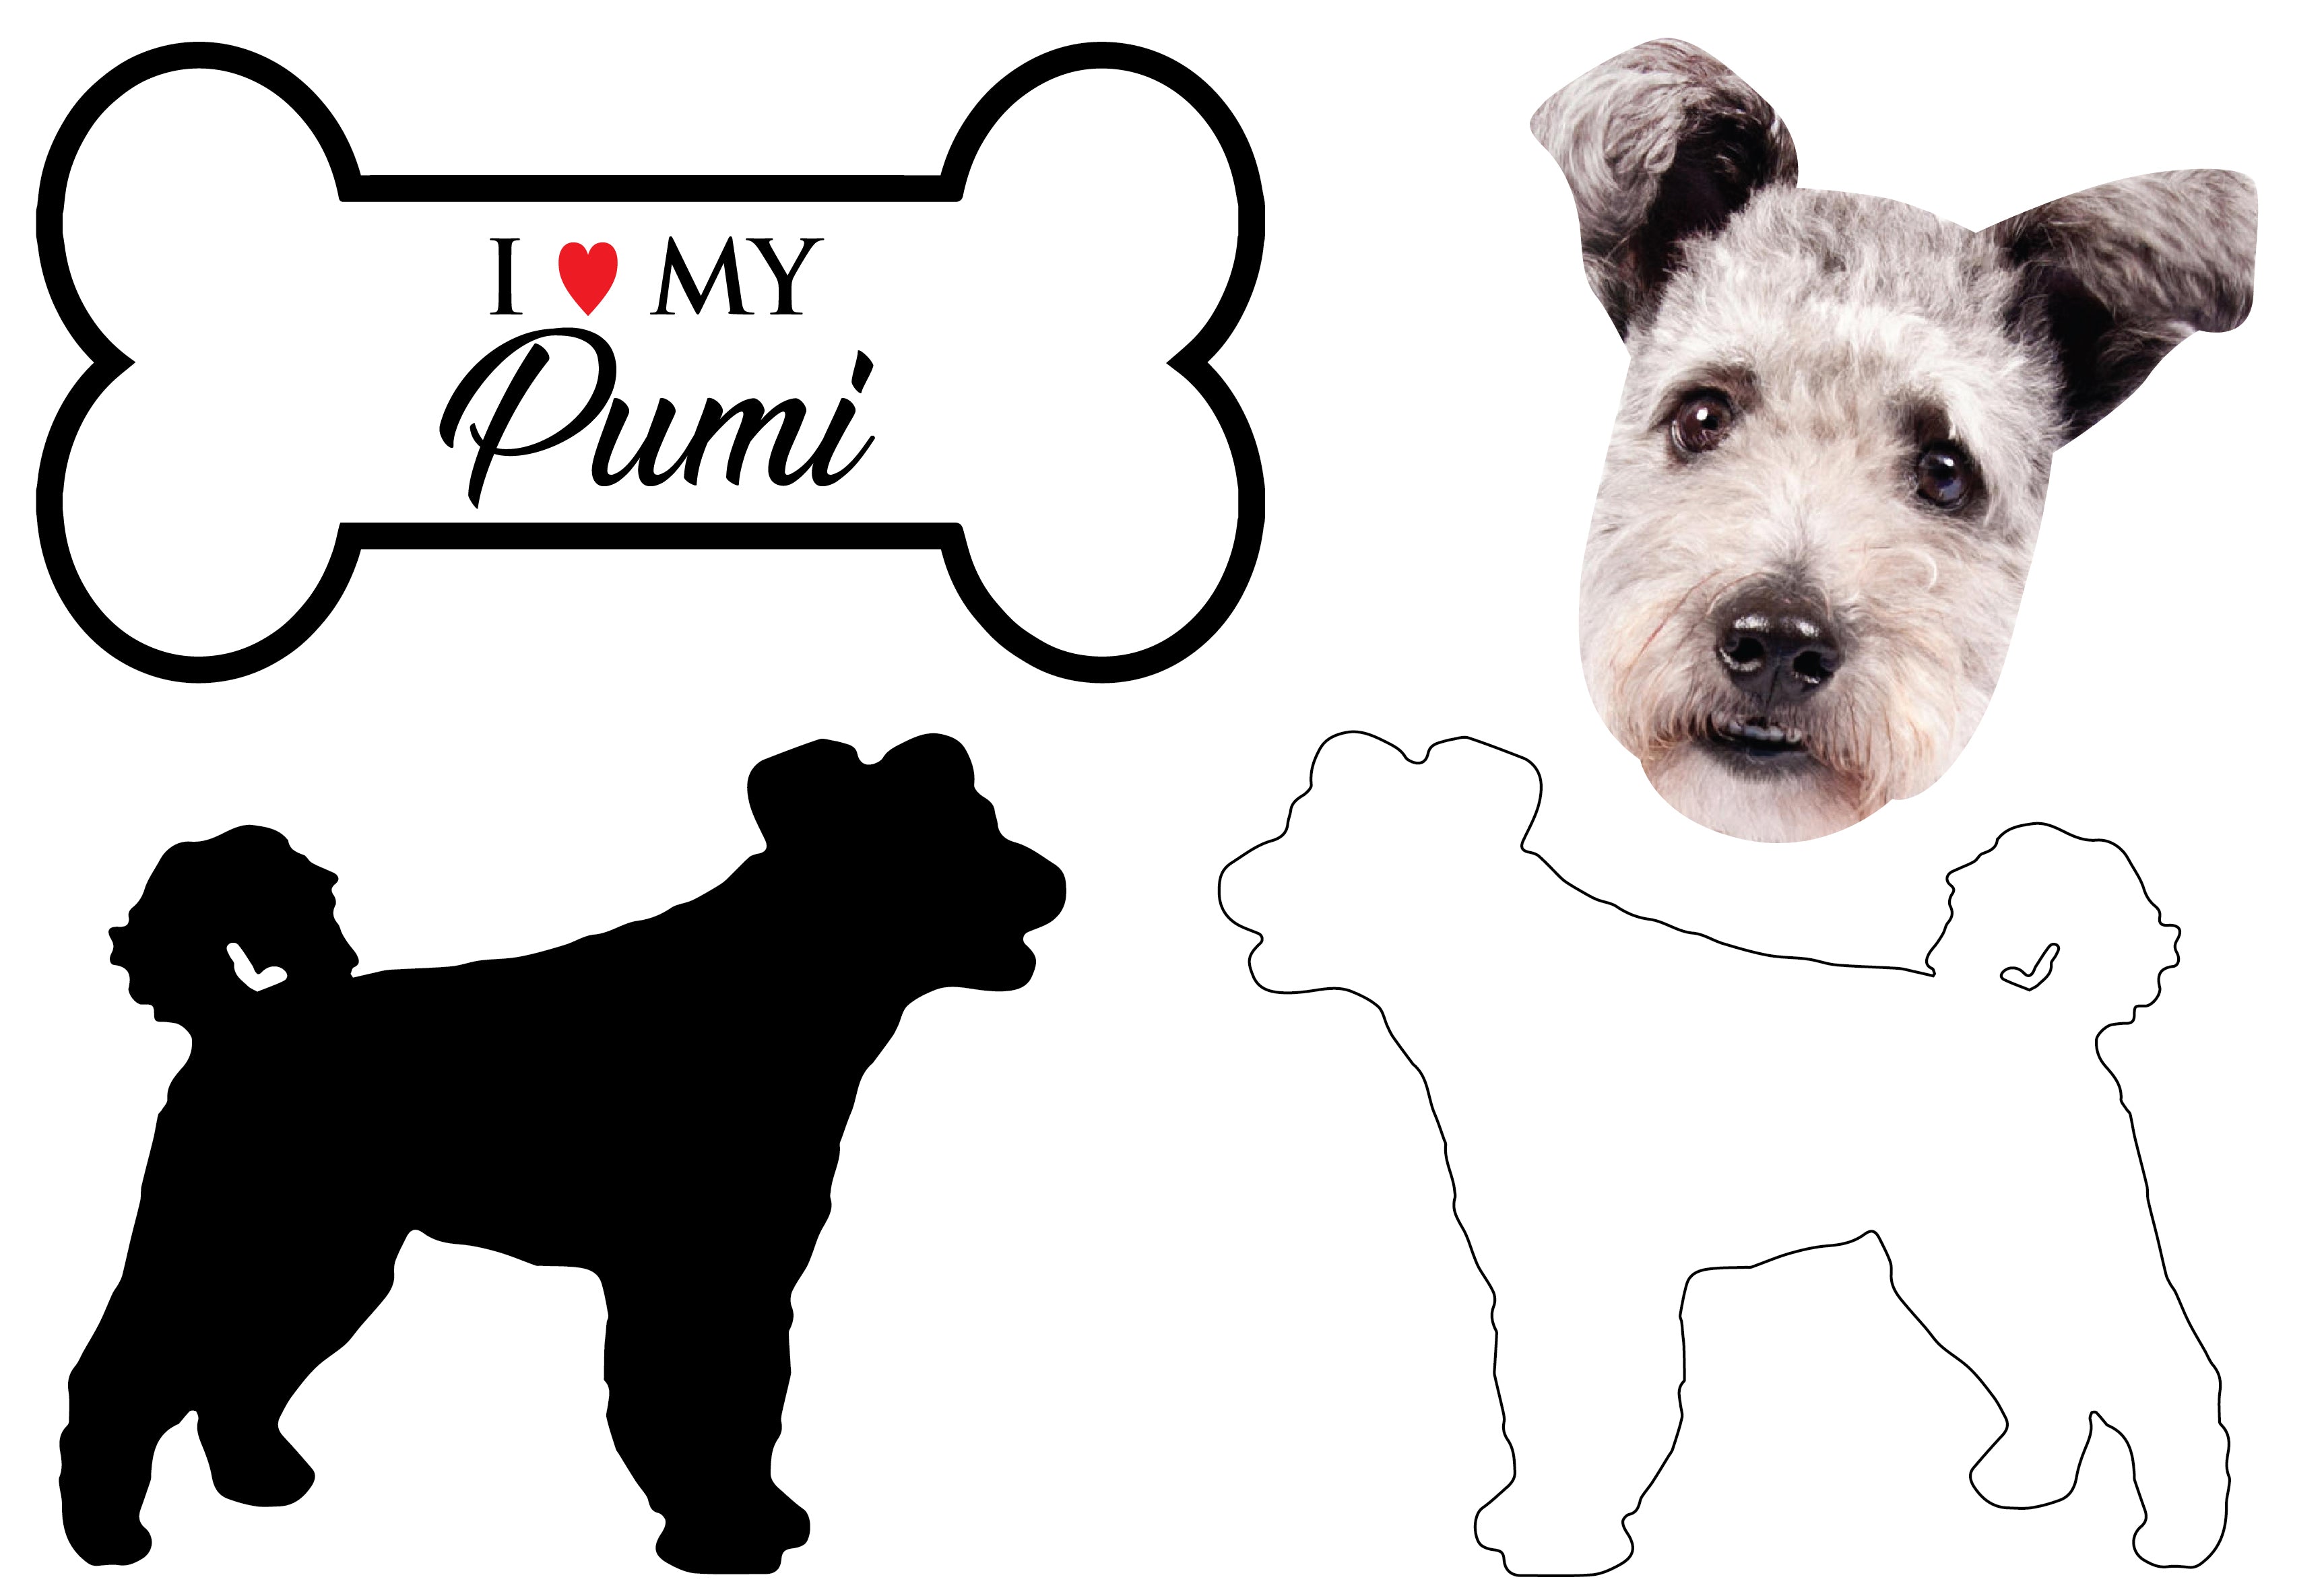 Pumi - Dog Breed Decals (Set of 16) - Sizes in Description